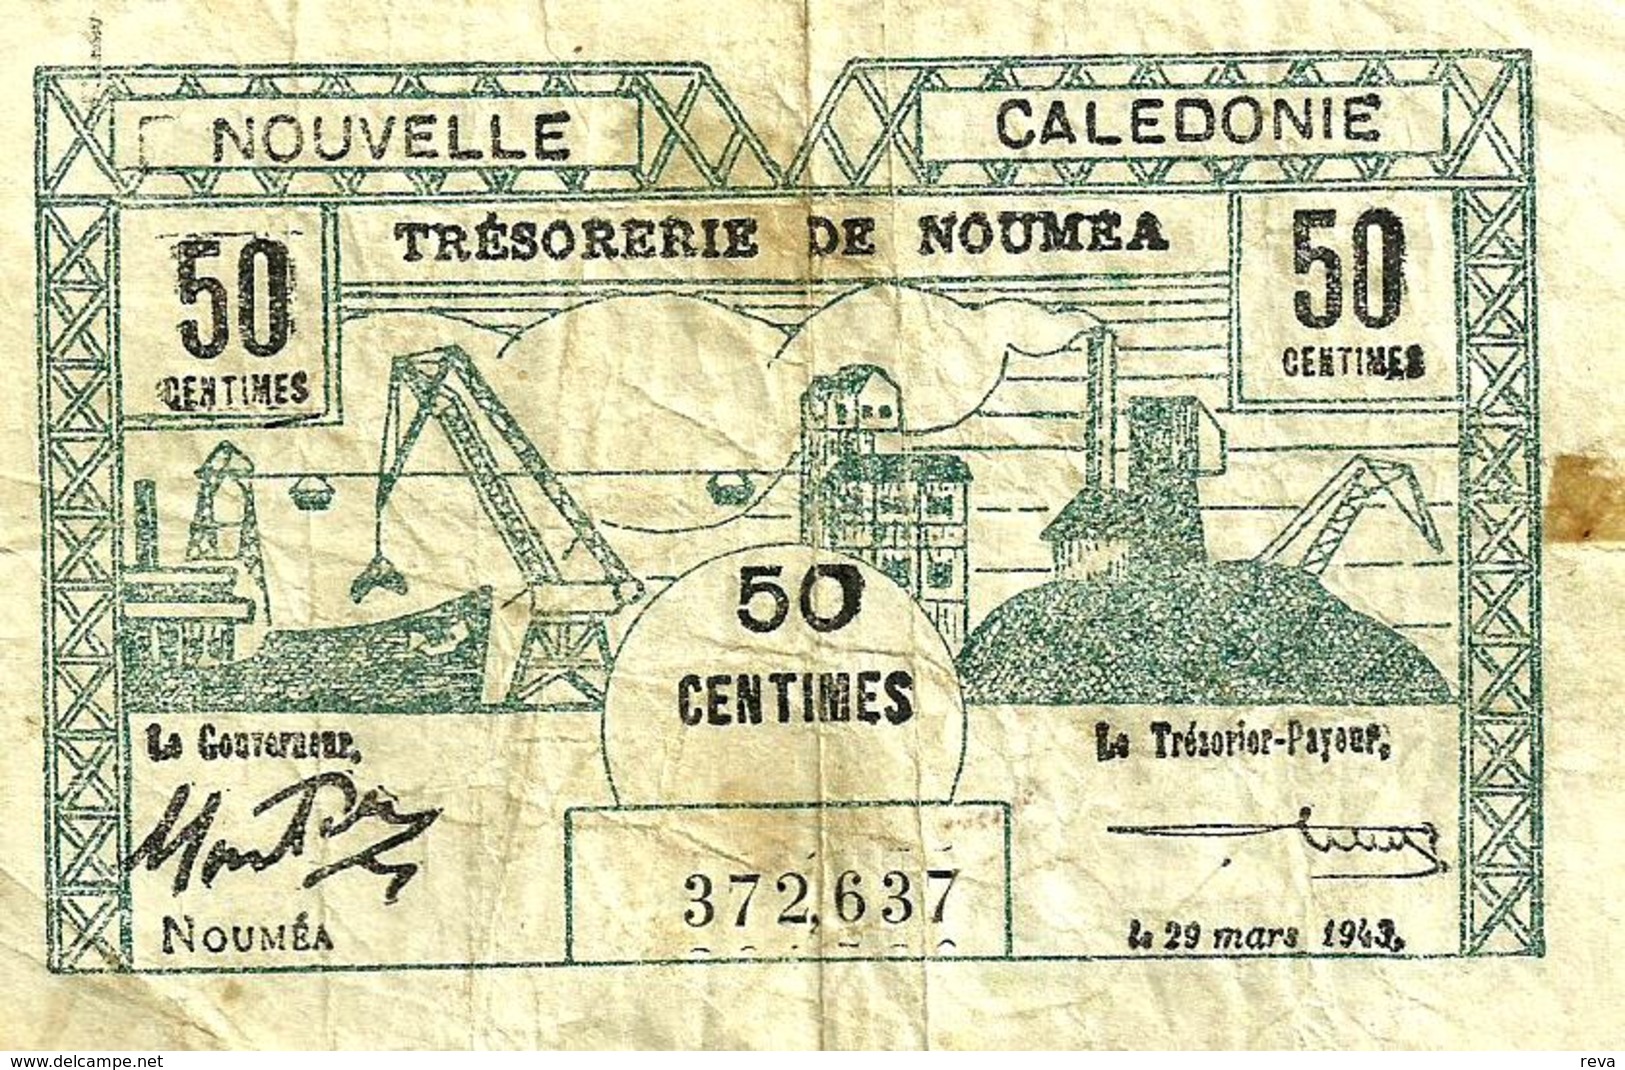 NEW CALEDONIA 50 CENTIMES MINE FRONT ANIMAL HEAD BACK WWII EMERGENCY ISSUE DATED 29-03-1943 P54 AVF READ DESCRIPTION!! - Nouméa (New Caledonia 1873-1985)